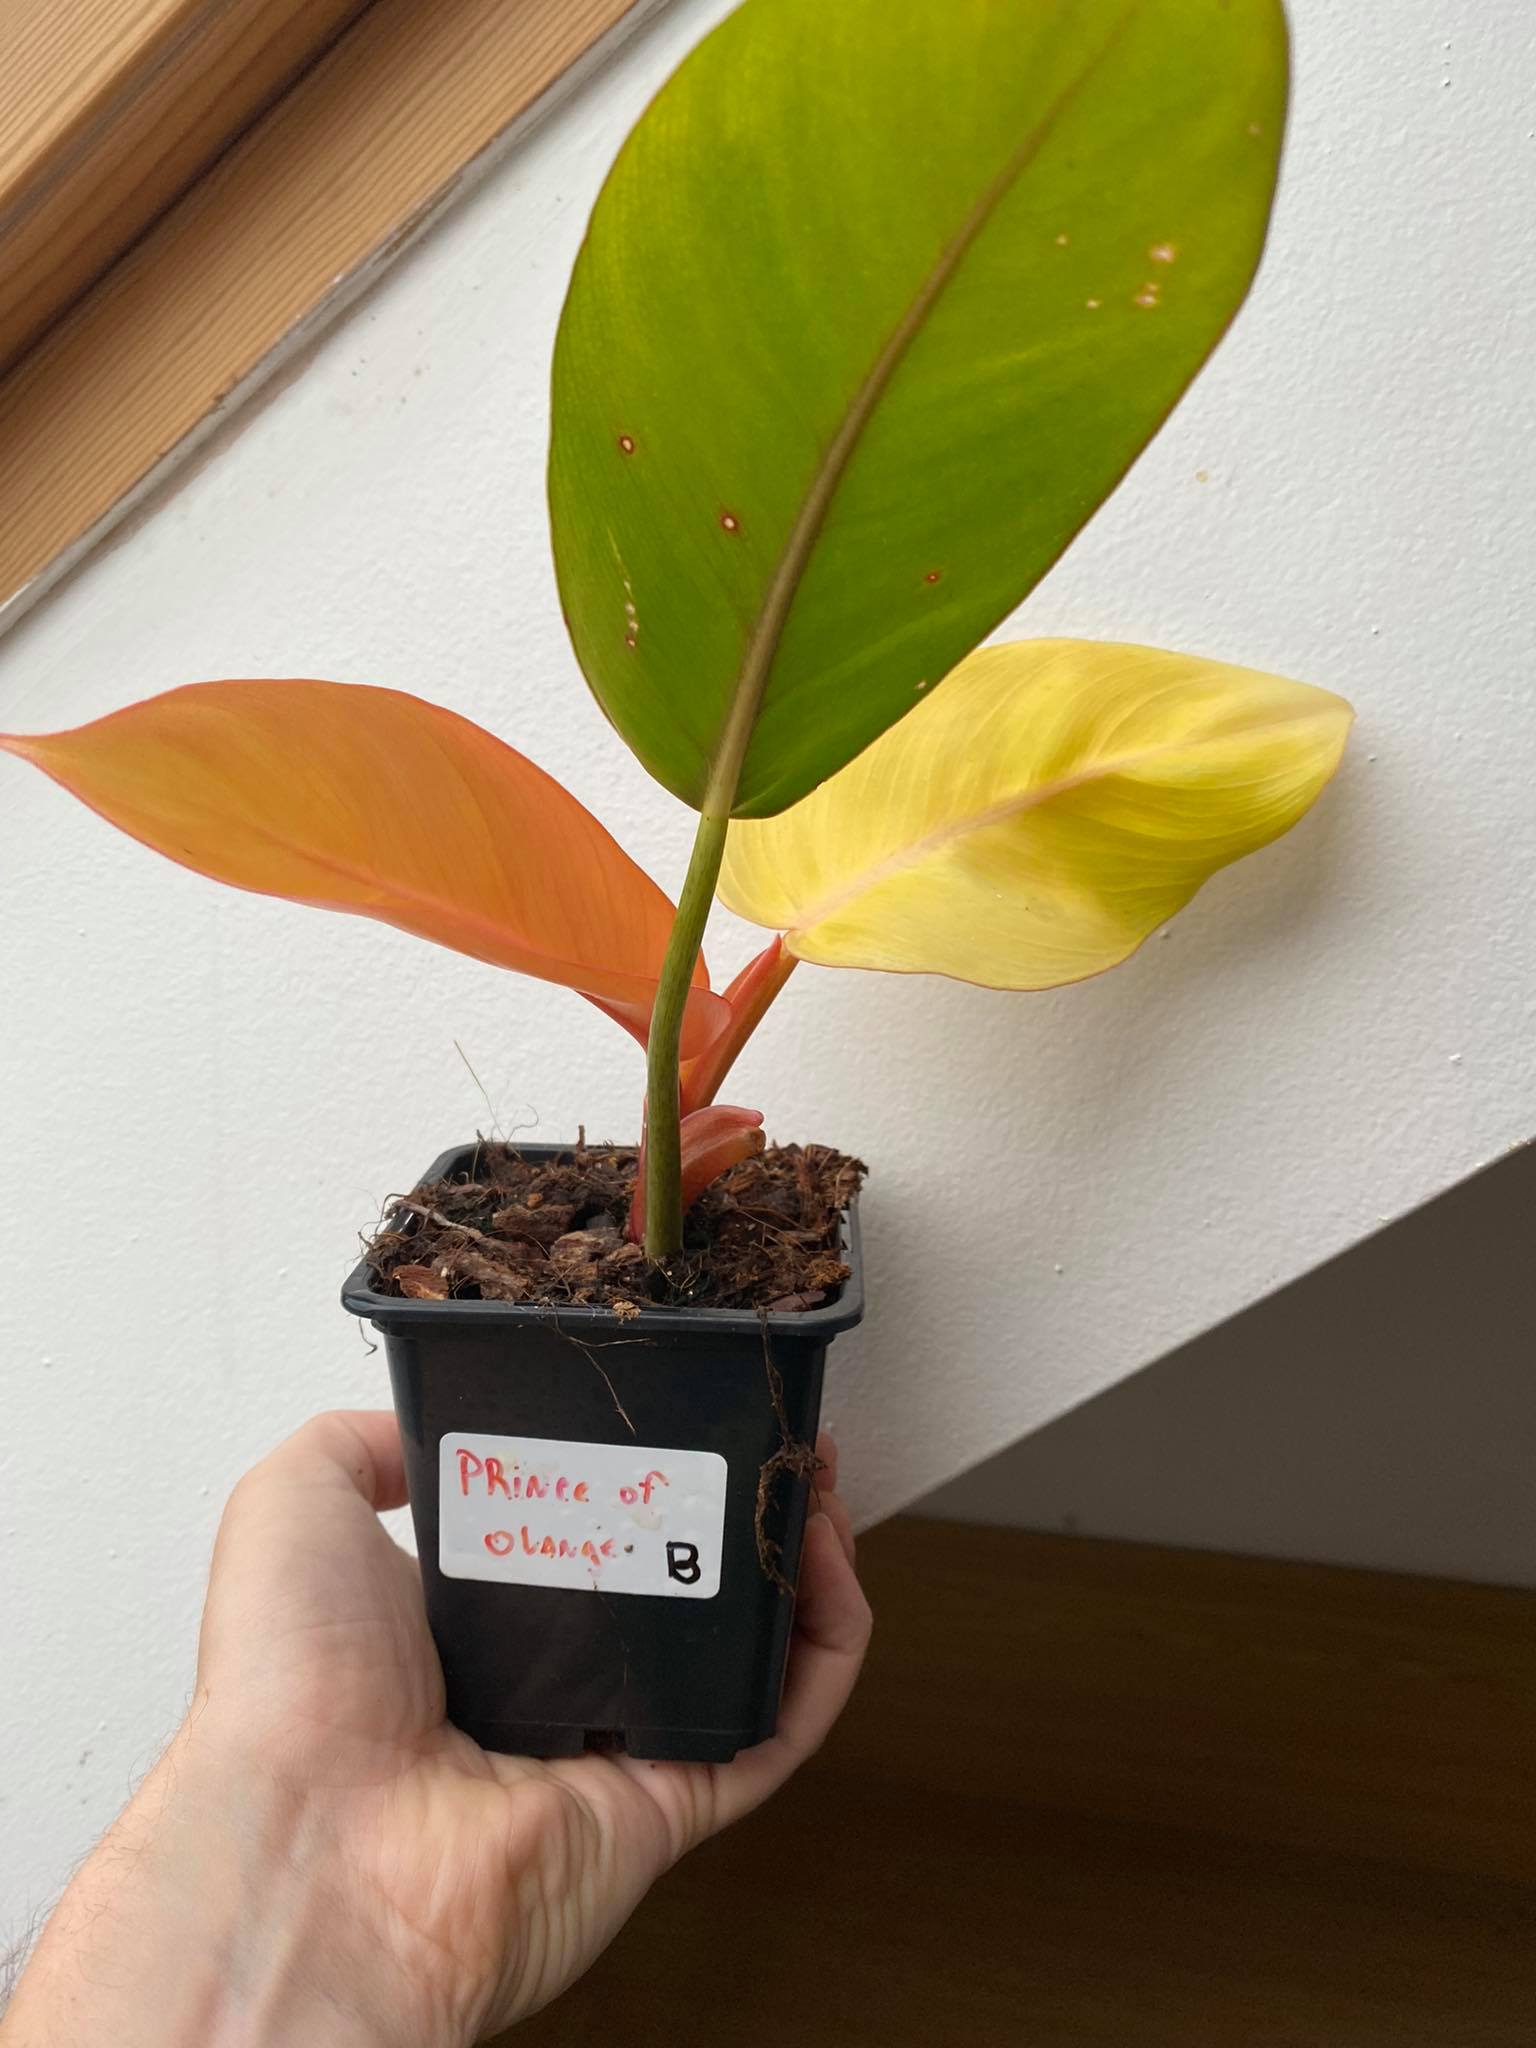 Philodendron prince of orange B